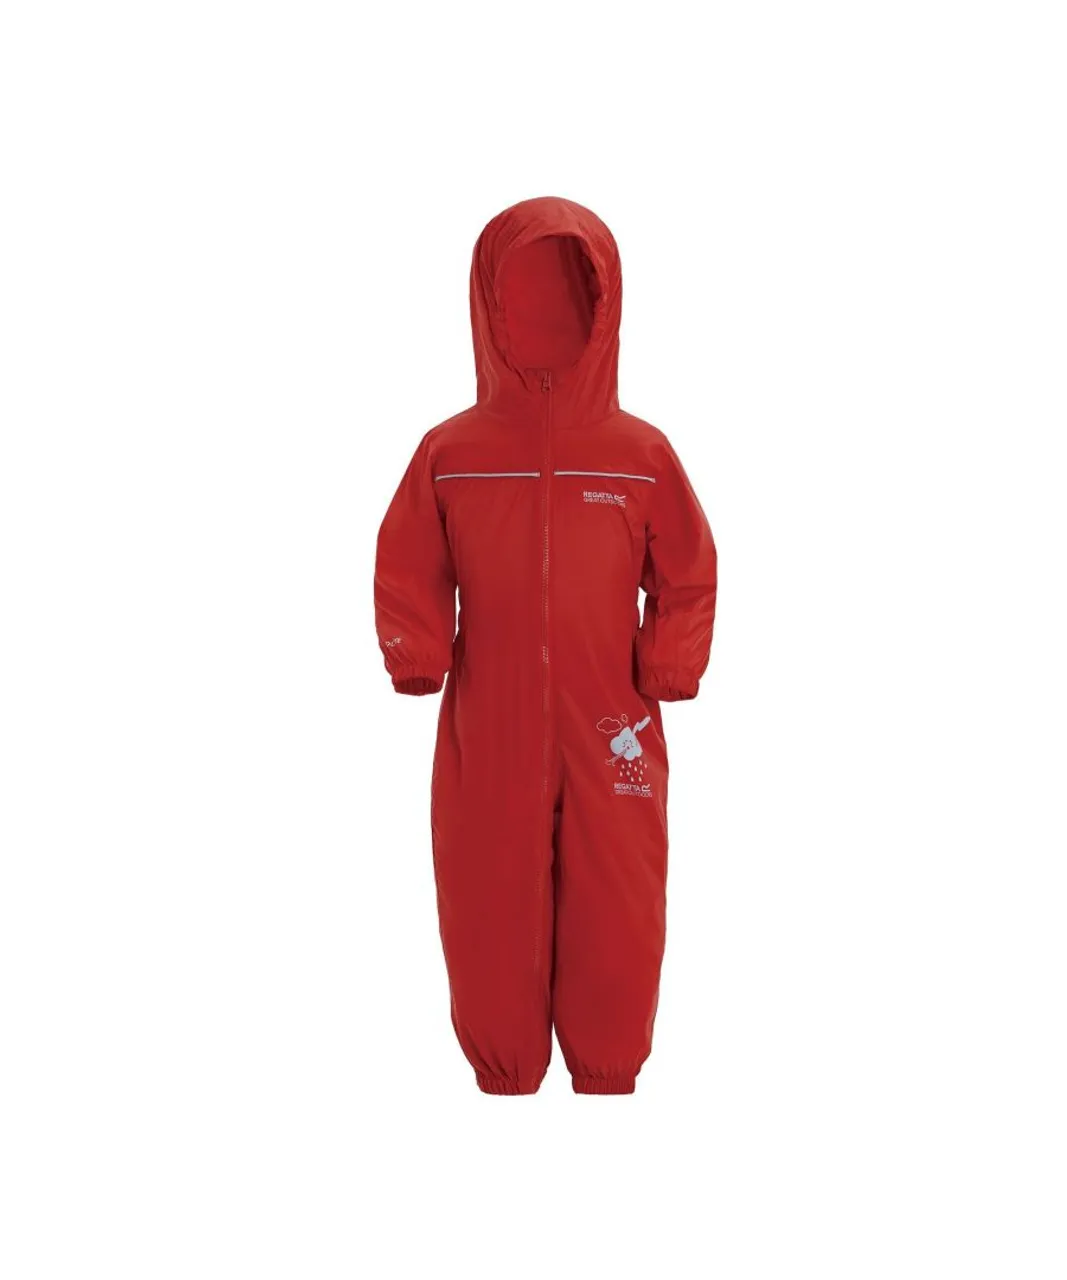 Regatta Boys Great Outdoors Childrens Toddlers Puddle IV Waterproof Rainsuit - Red